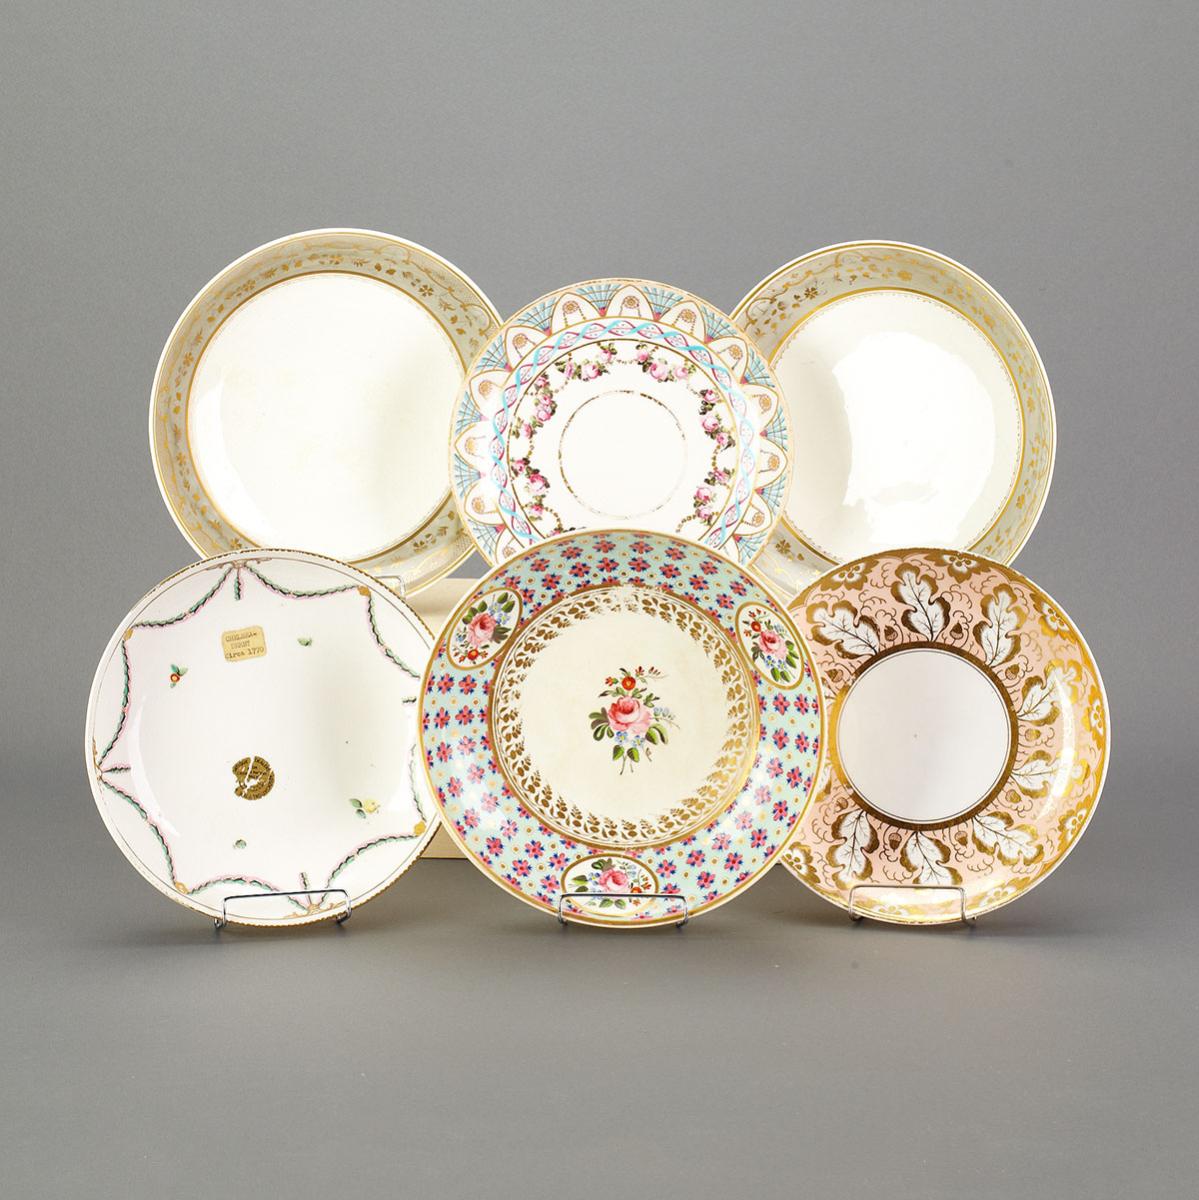 Six English Porcelain Saucer Dishes, late 18th/early 19th century